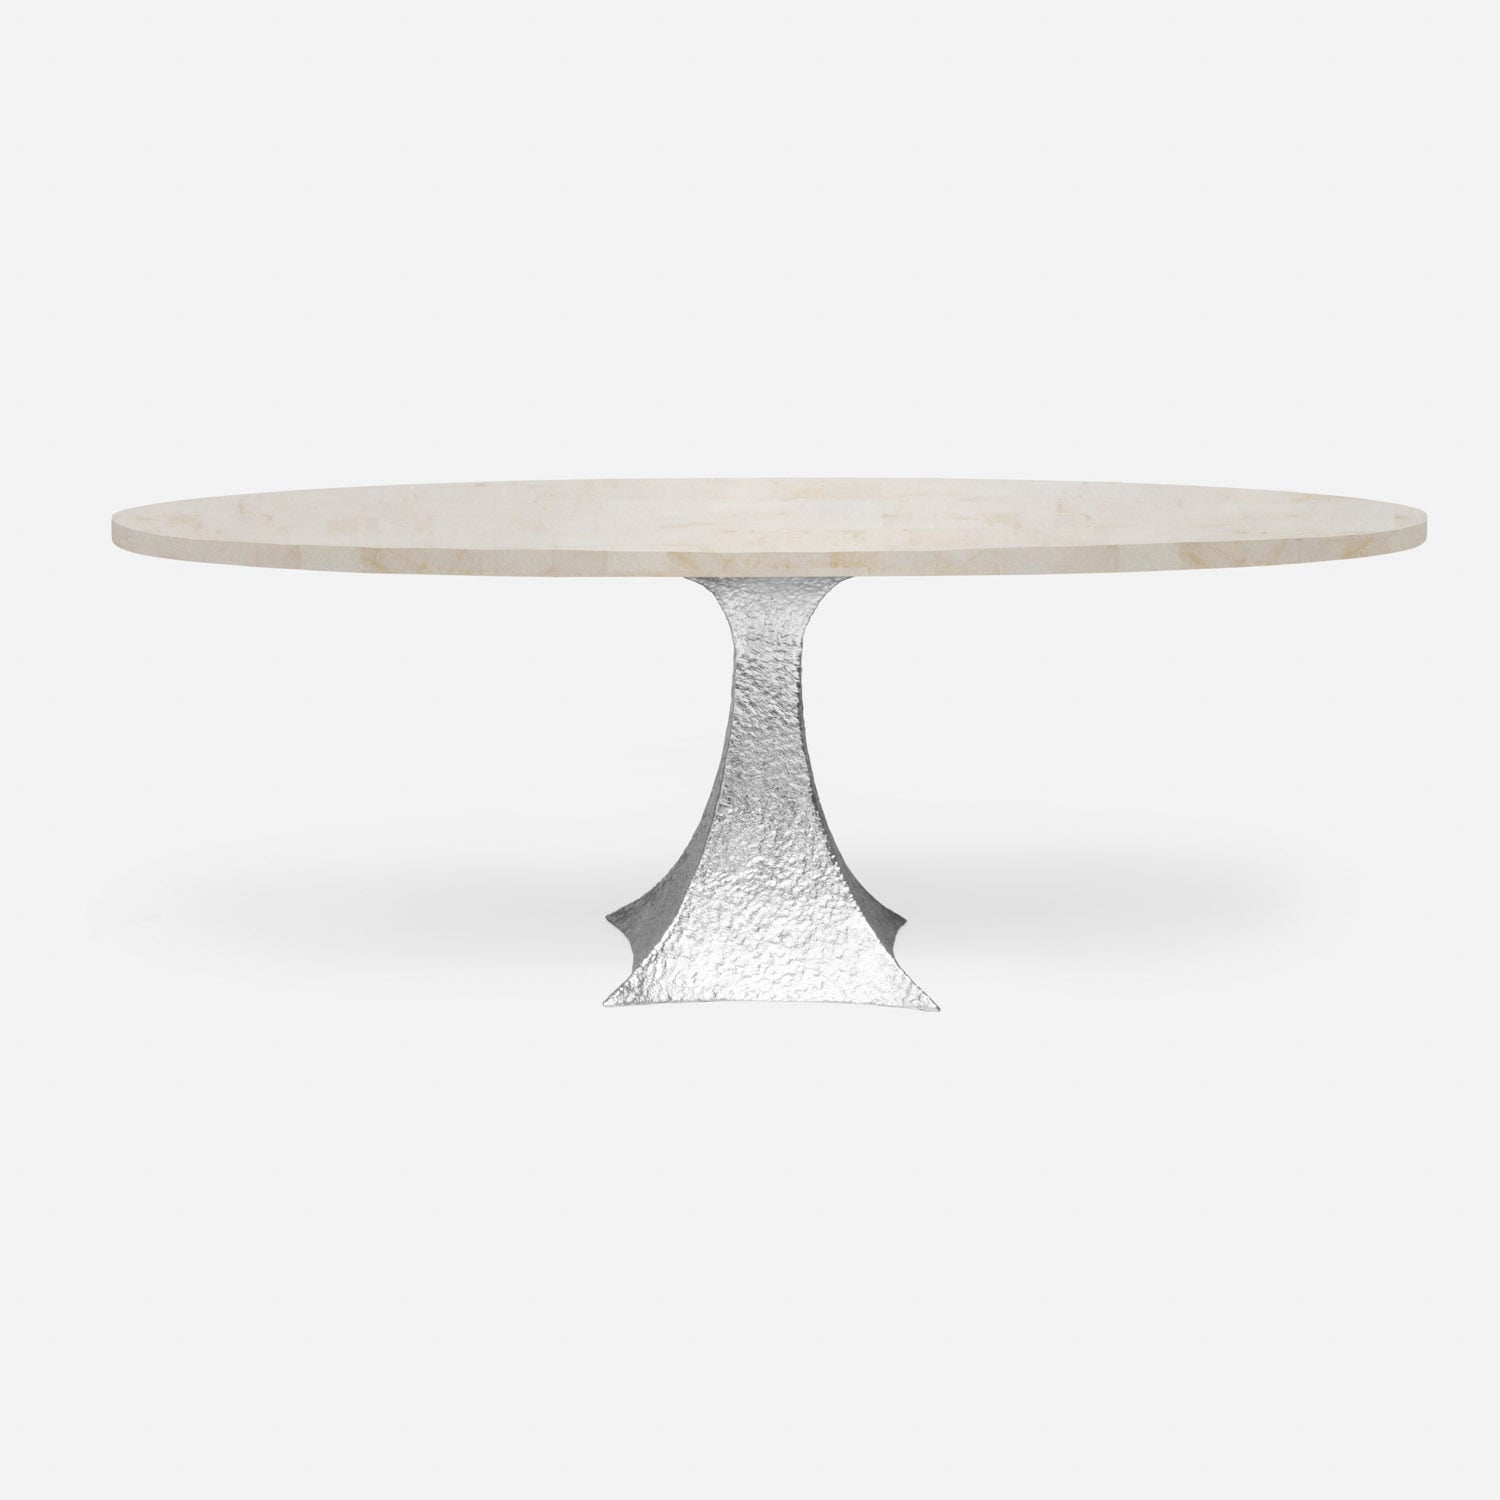 Made Goods Noor 96" x 44" x 30" Double Base Bumpy Cool Silver Iron Dinning Table With Oval Ice Crystal Stone Table Top